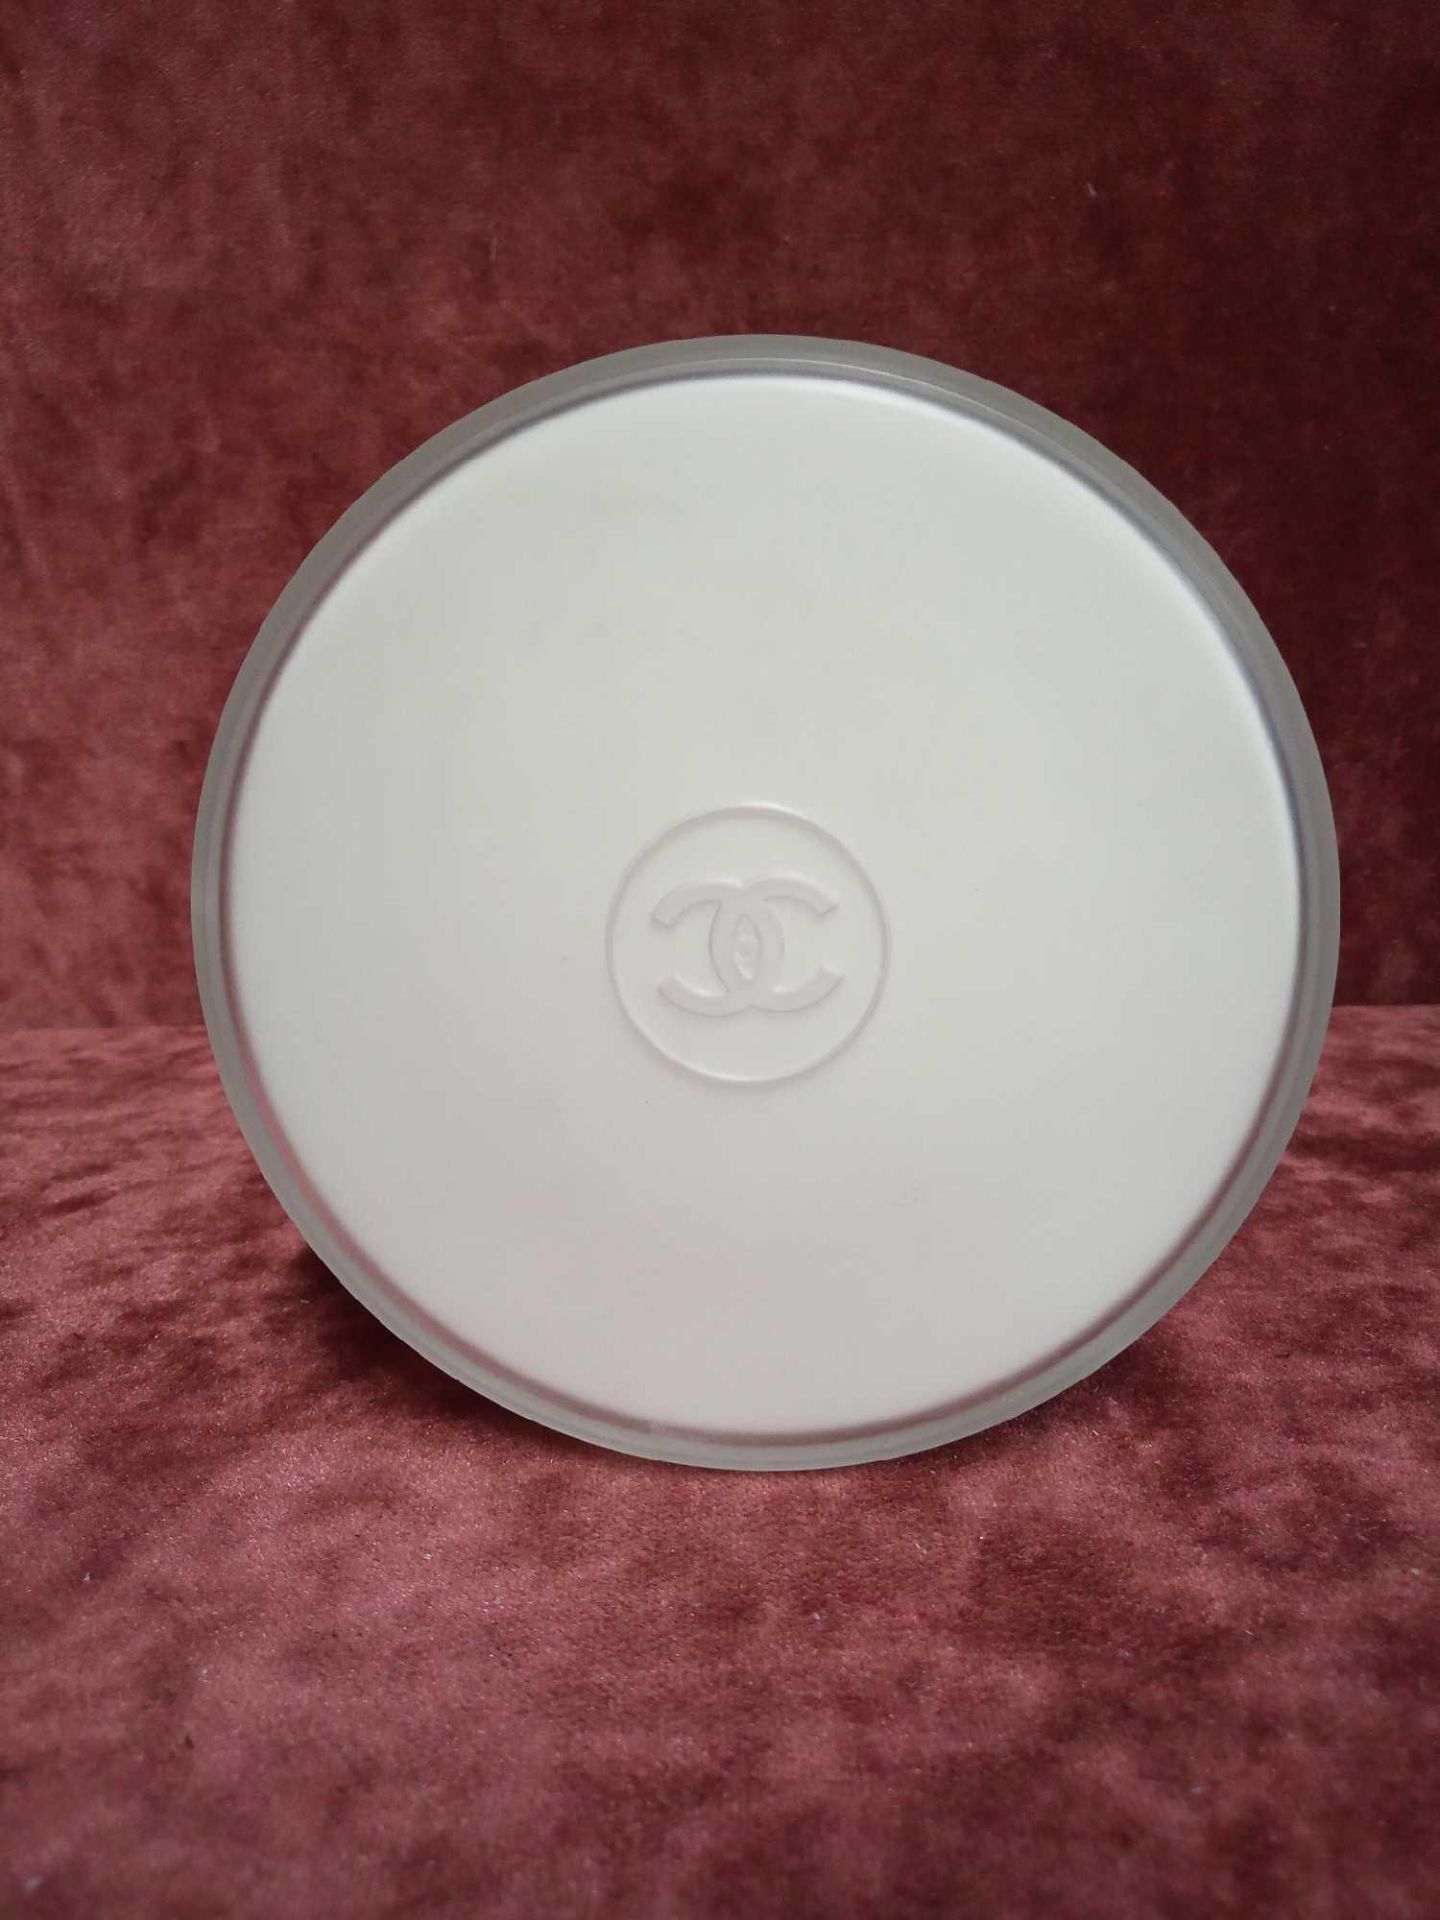 RRP £70 Unboxed 200G Tester Of Chanel Chance Moisturizing Body Cream Ex-Display - Image 3 of 3